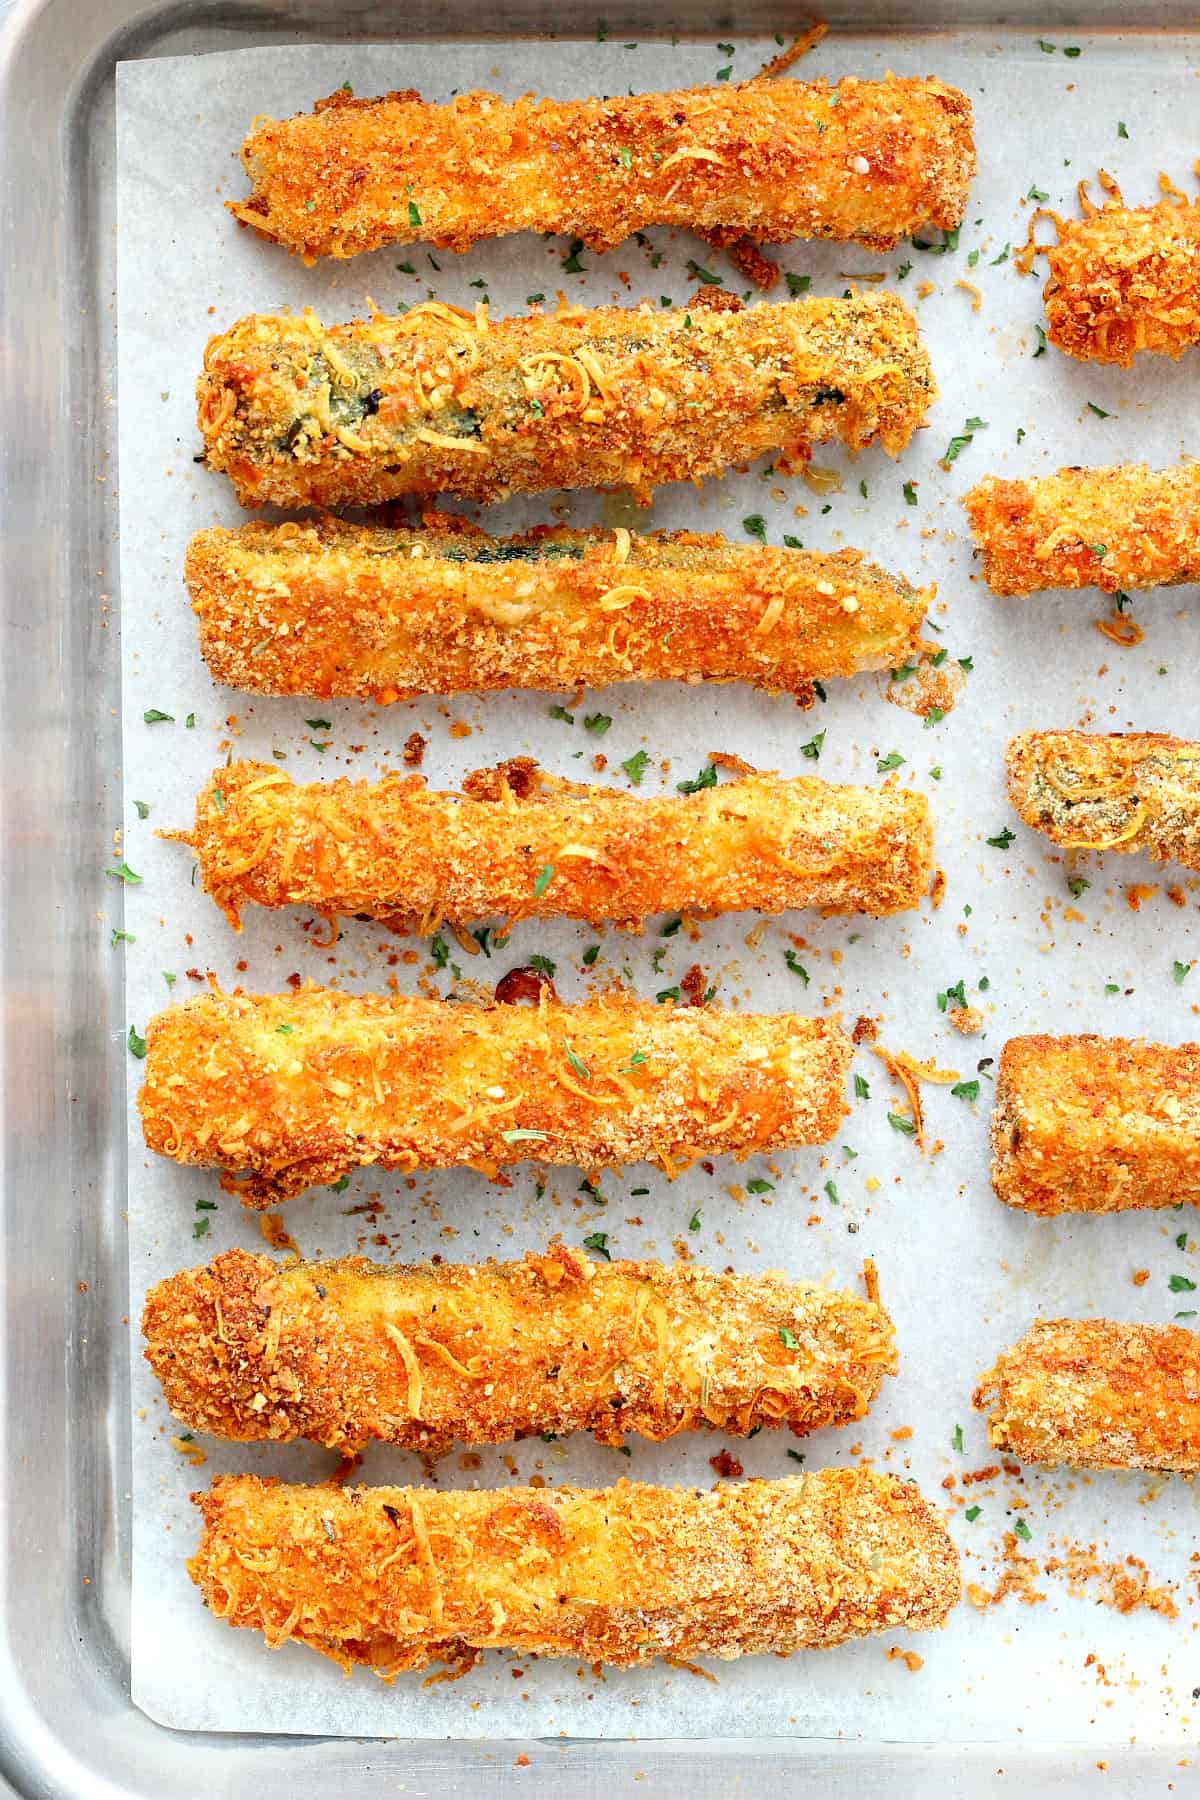 Baked zucchini fries on a baking sheet.